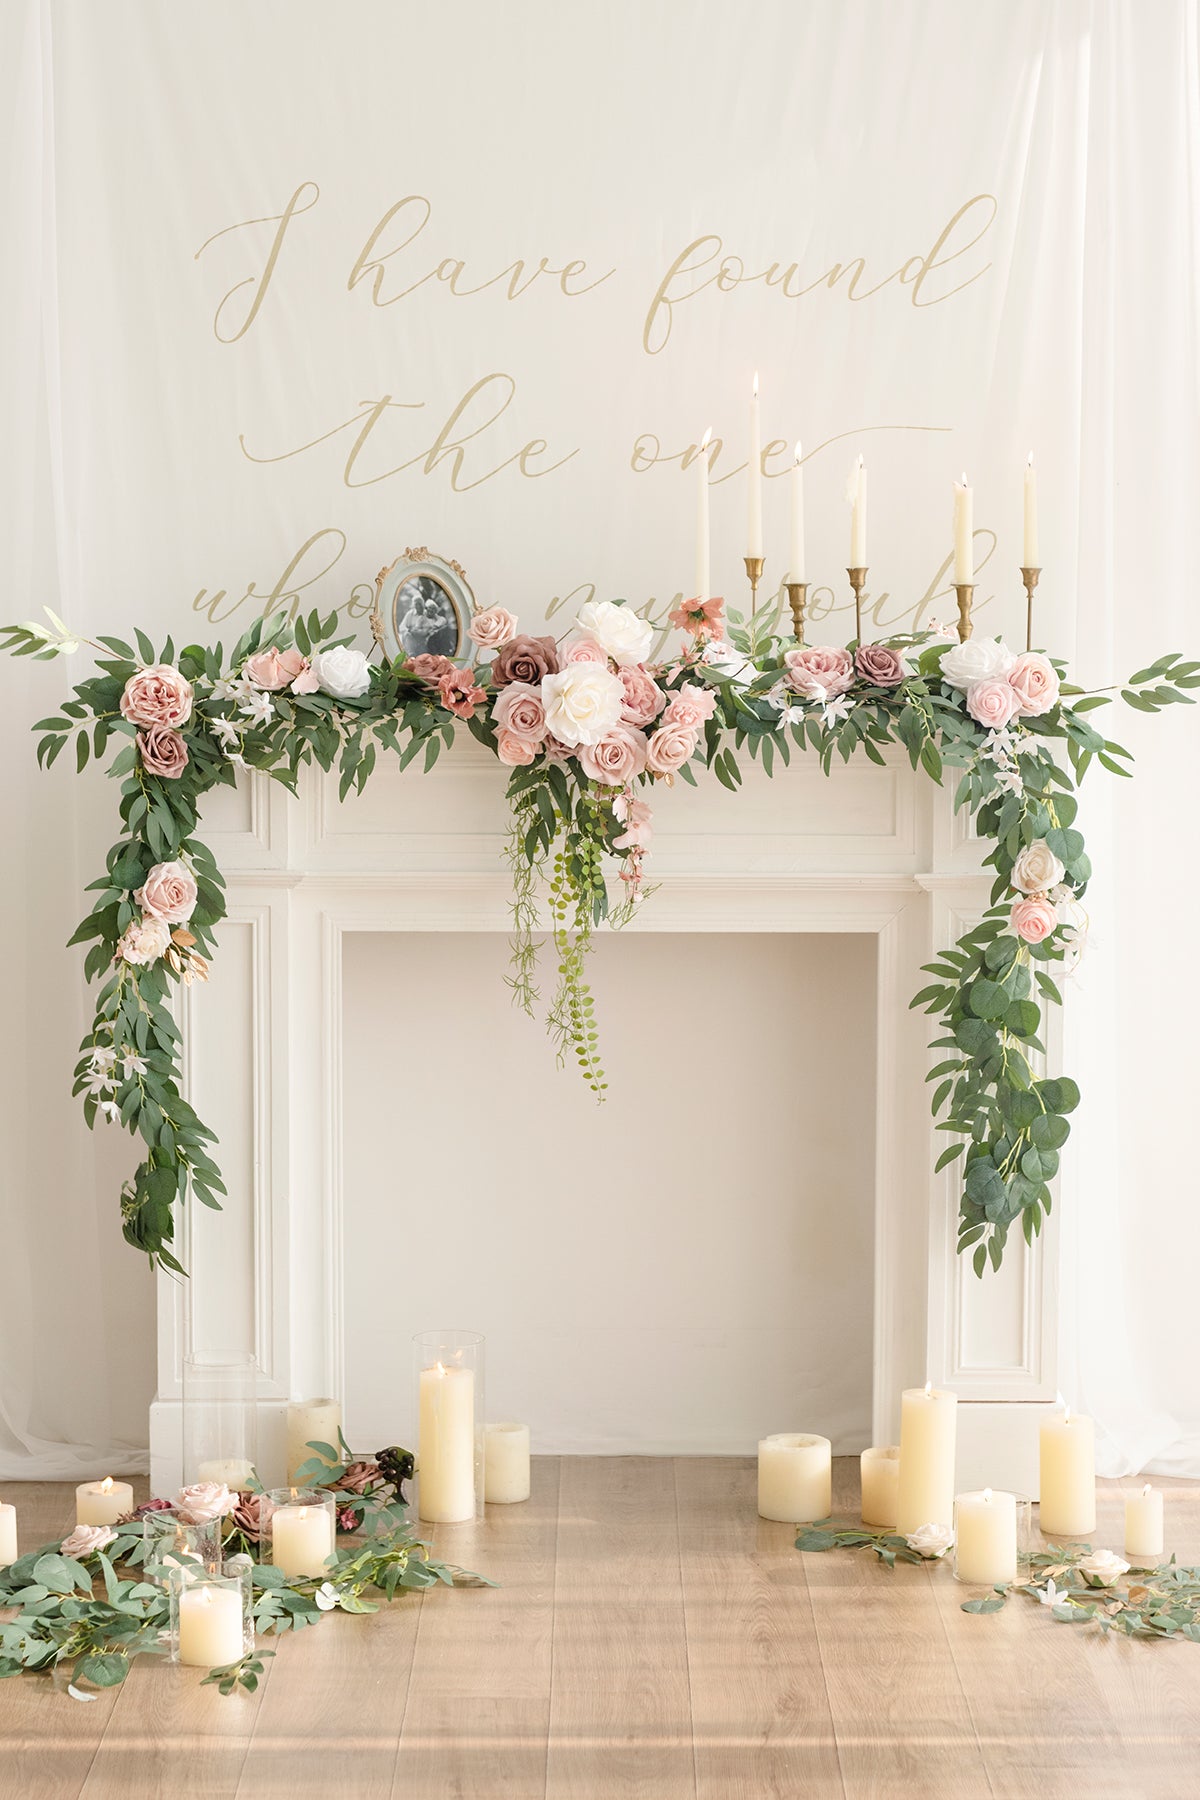 9ft Head Table Flower Garland in Dusty Rose & Cream